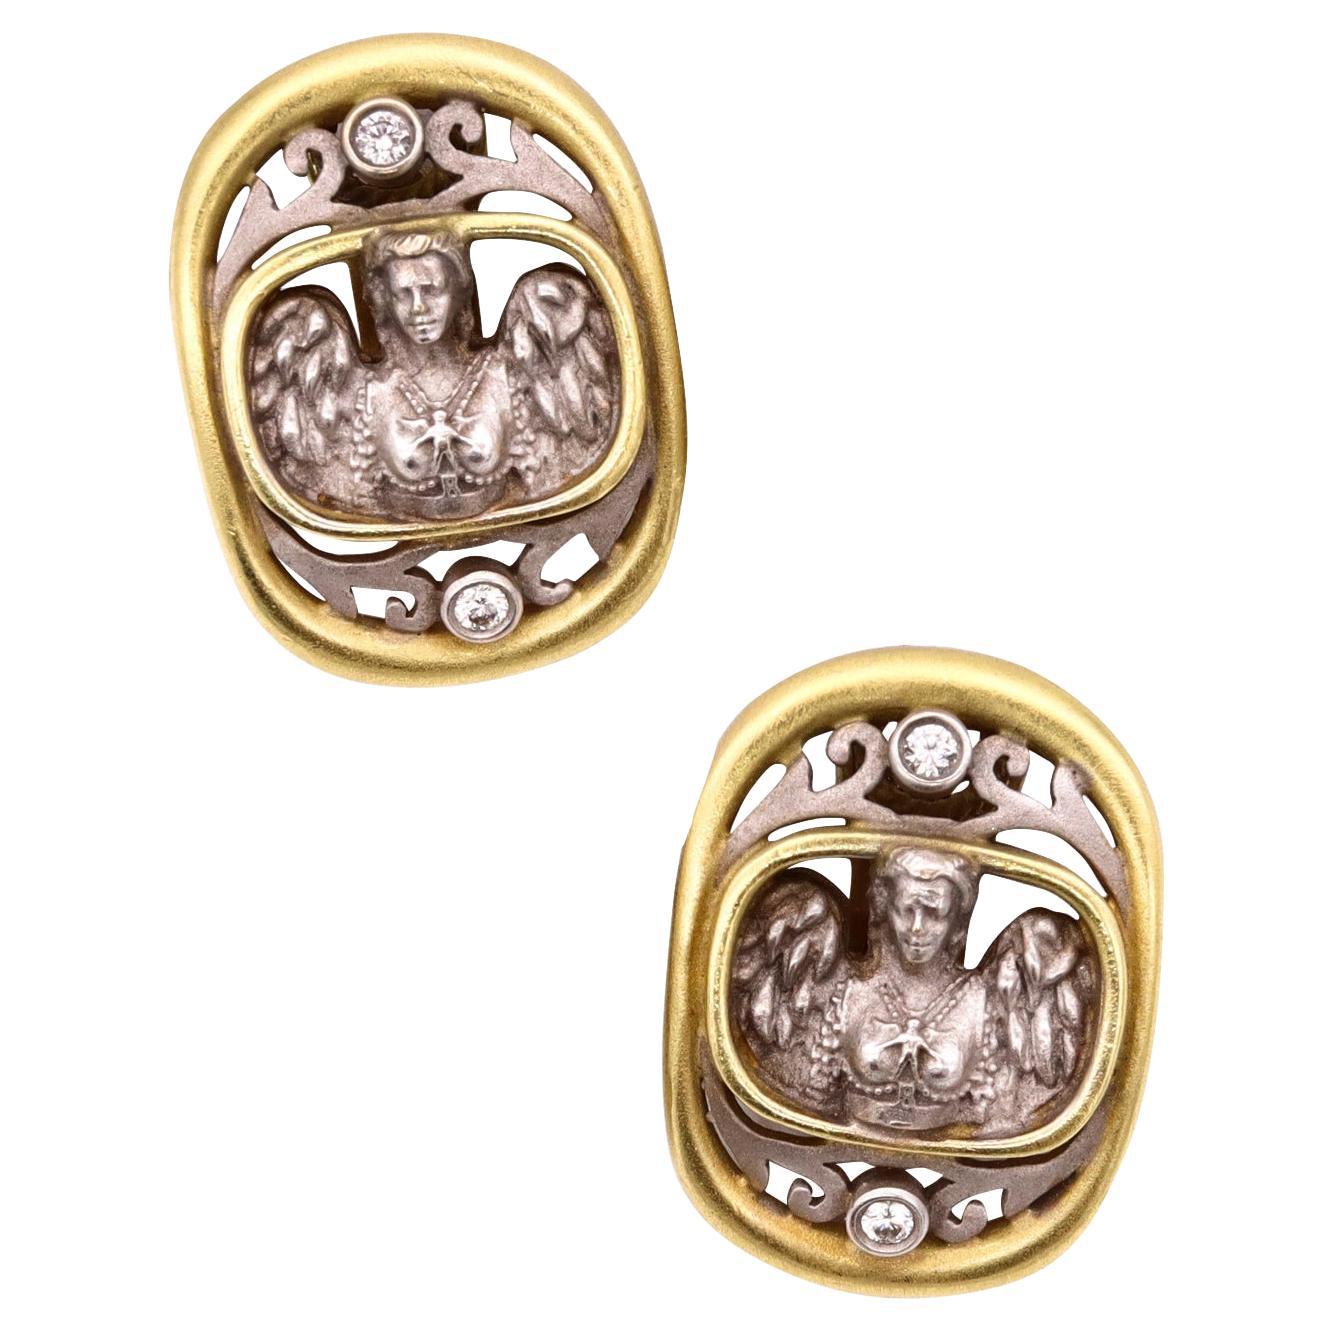 Kieselstein Cord 2001 Classic Etruscan Clips Earrings 18Kt Gold With VS Diamonds For Sale